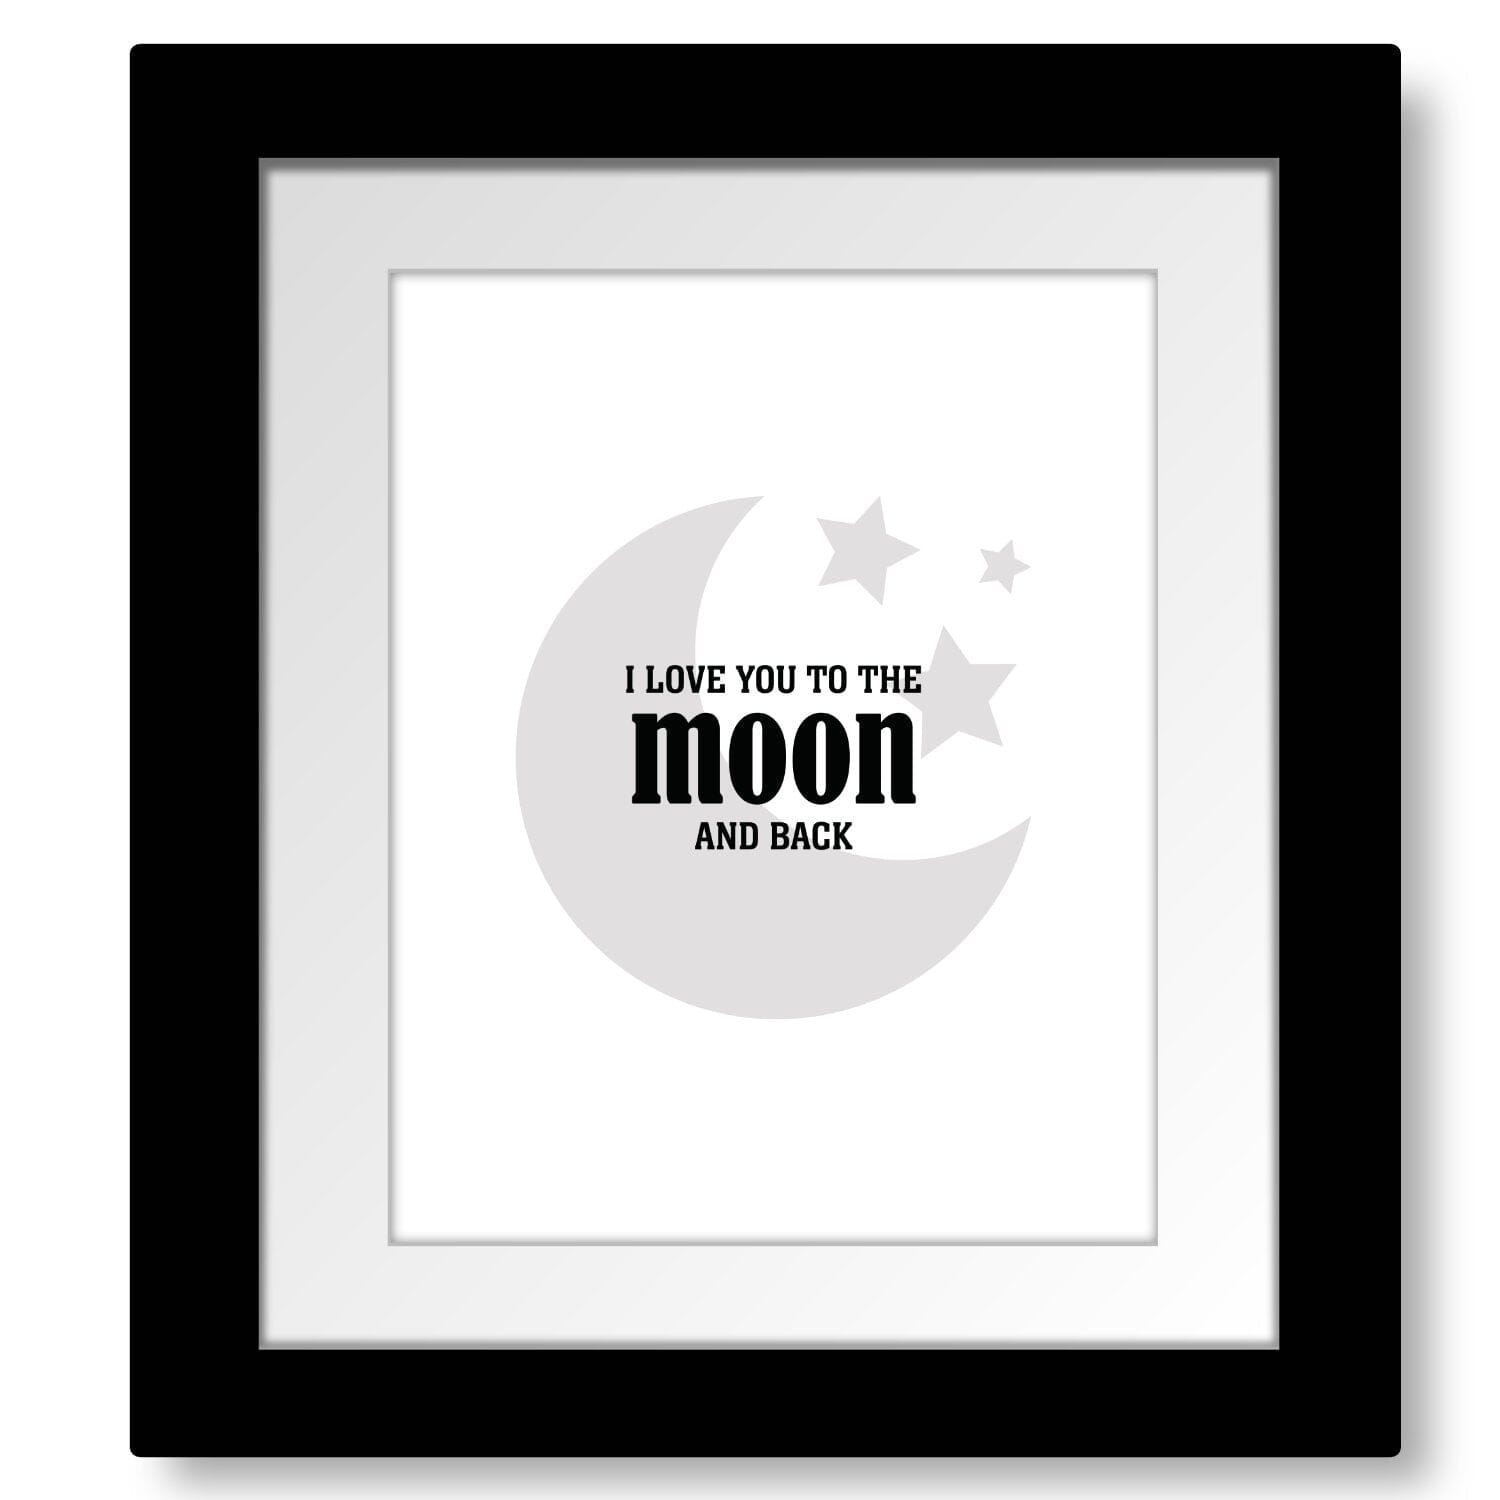 I Love You to the Moon and Back - Wise and Witty Art Wise and Wiseass Quotes Song Lyrics Art 8x10 Framed and Matted Print 